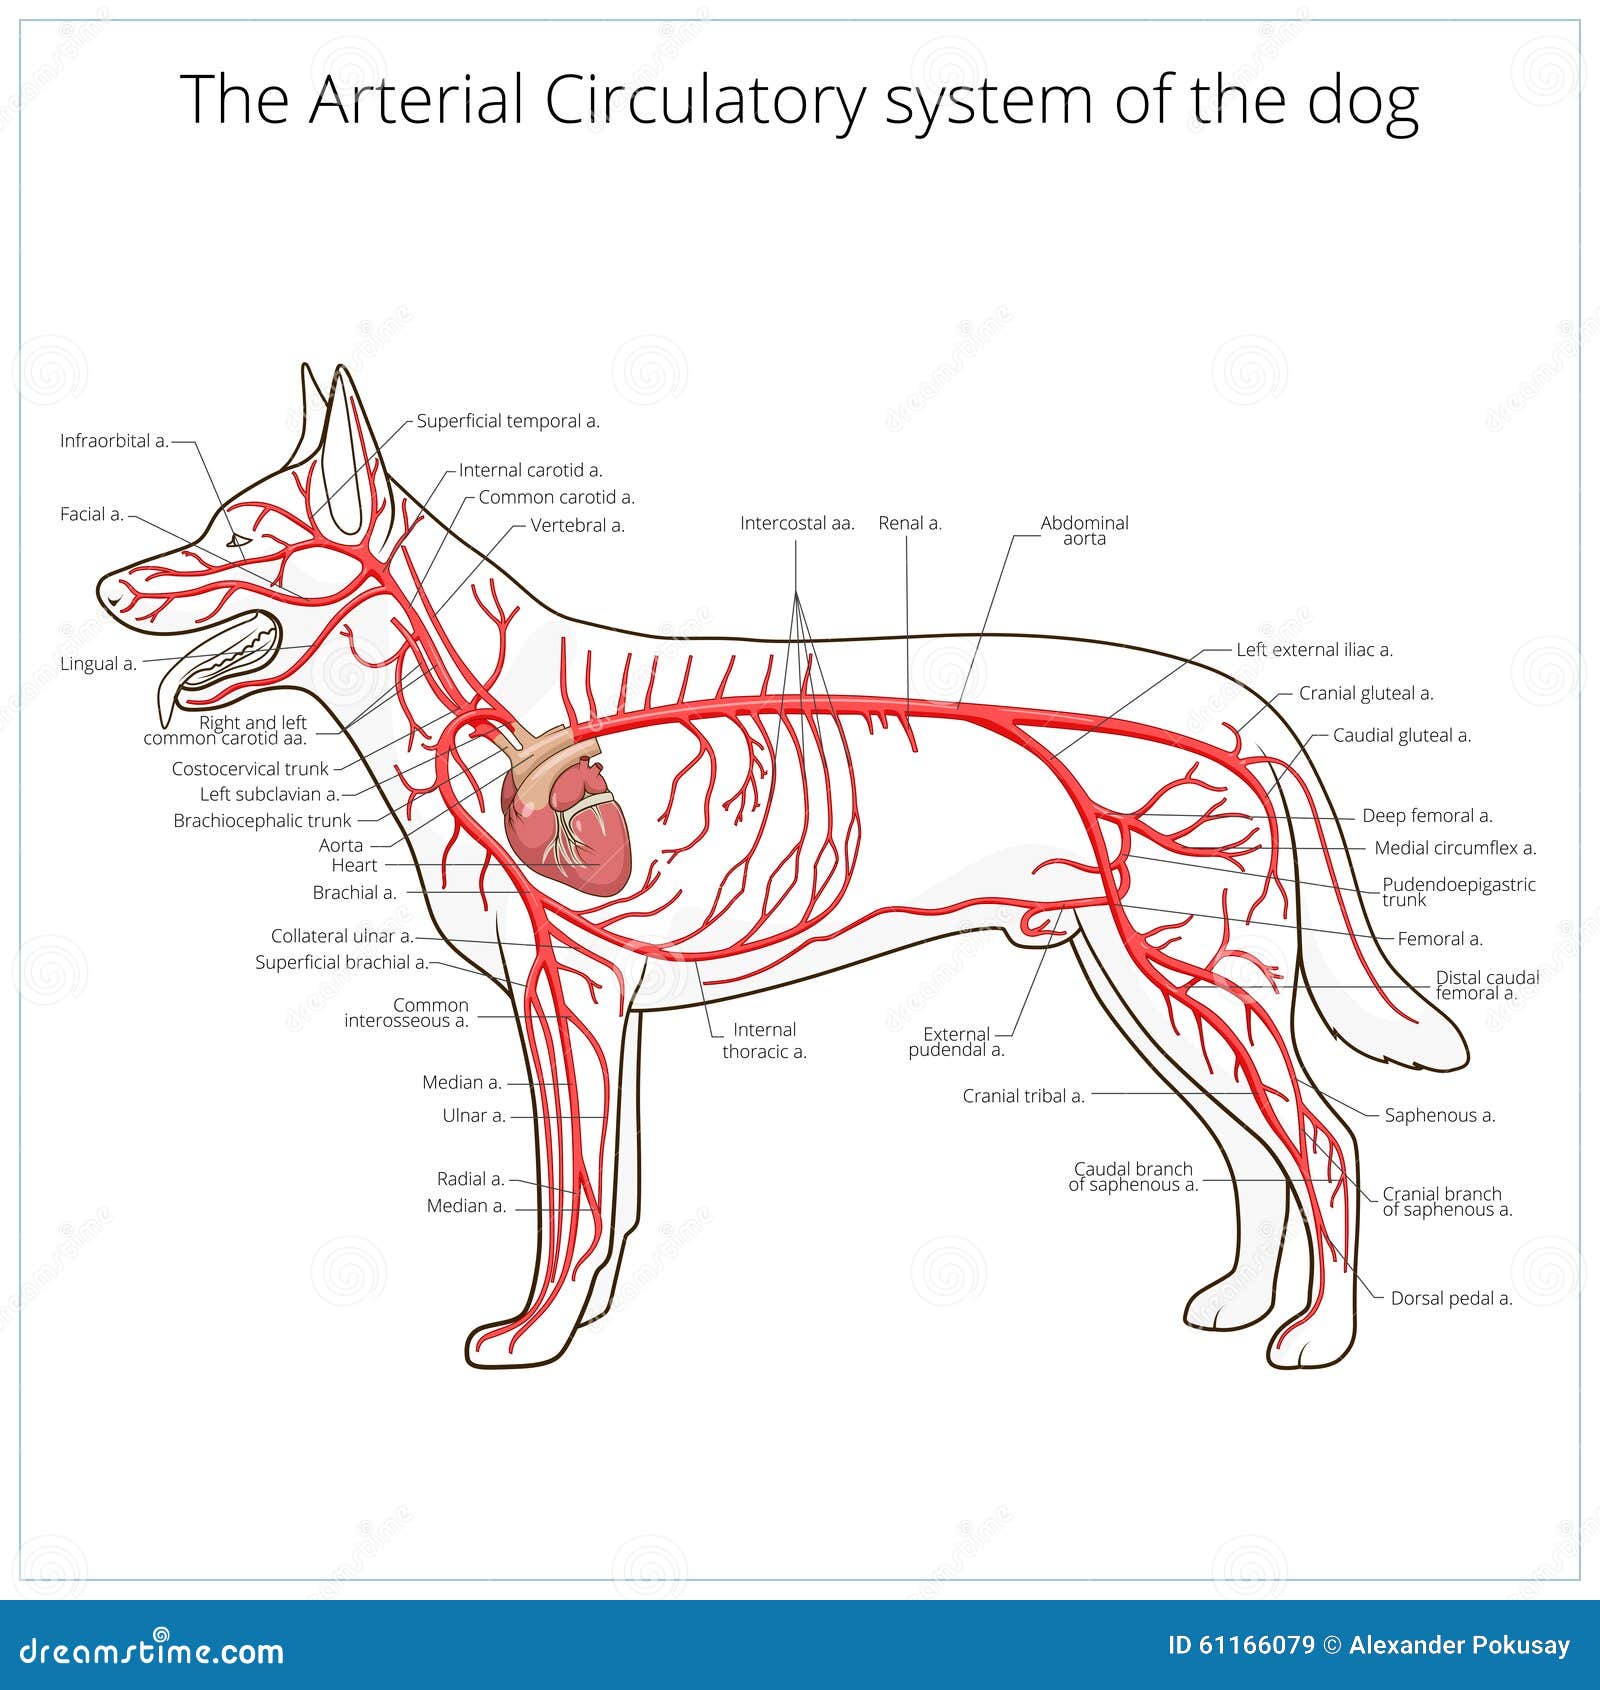 Arterial Circulatory System Of The Dog Vector Stock Vector - Image